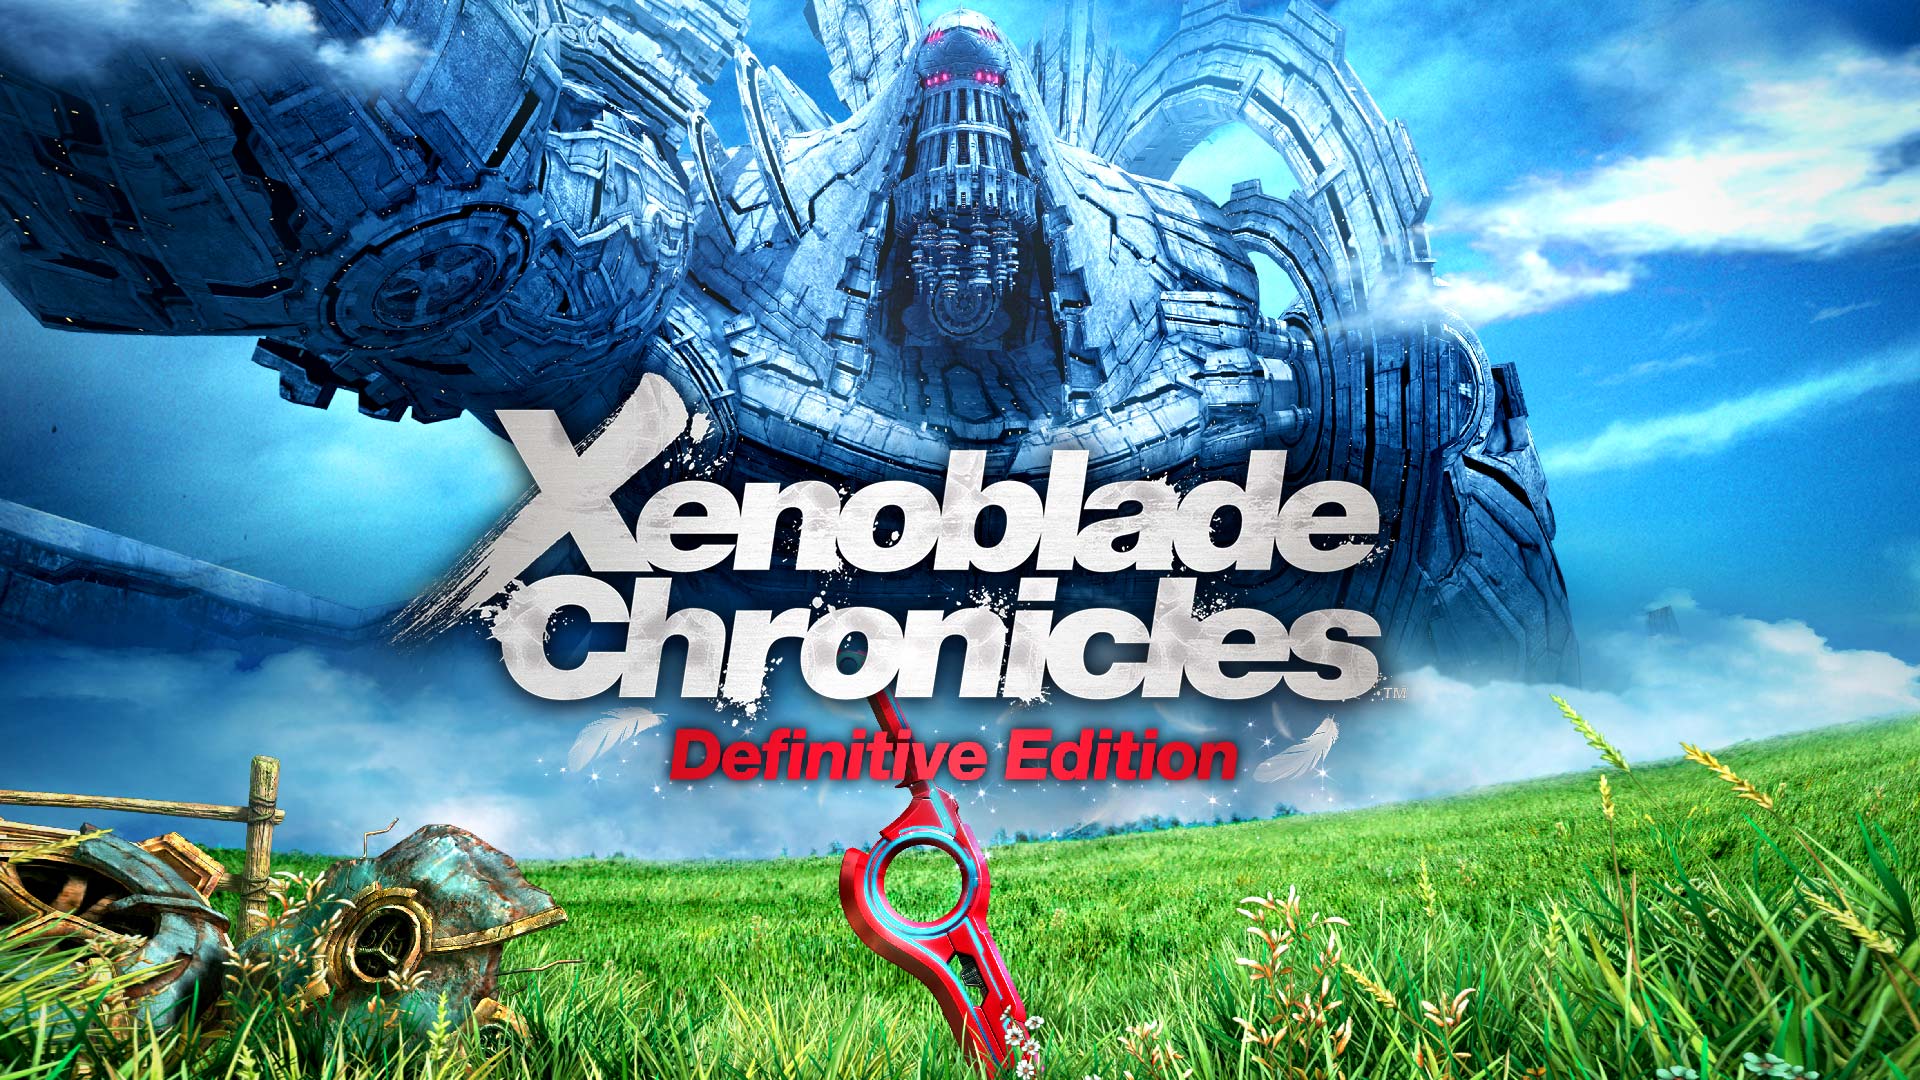 Xenoblade Chronicles: Definitive Edition launches May 29